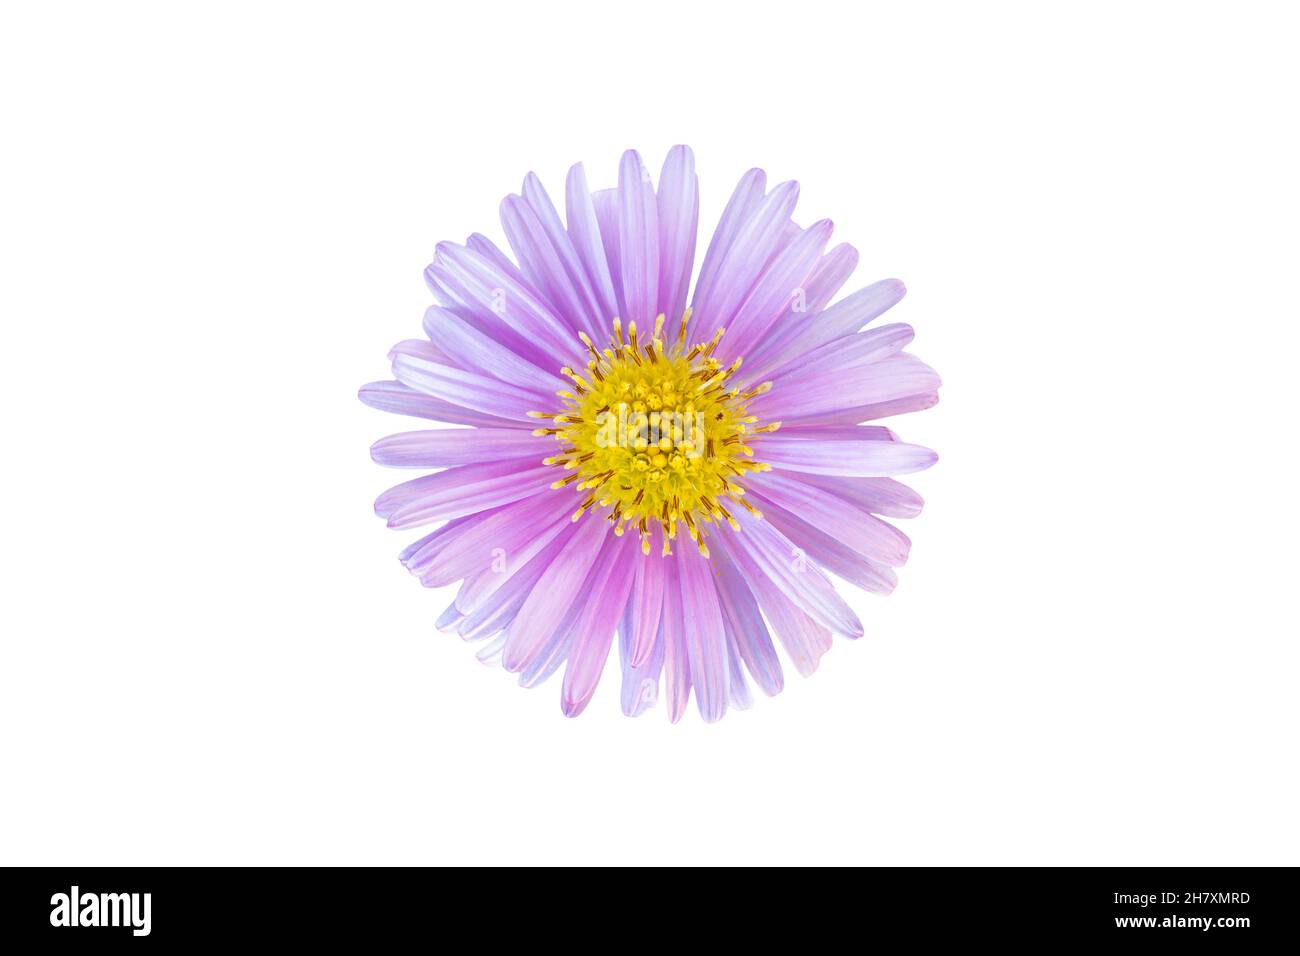 Rice button aster flower head isolated on white background Stock Photo